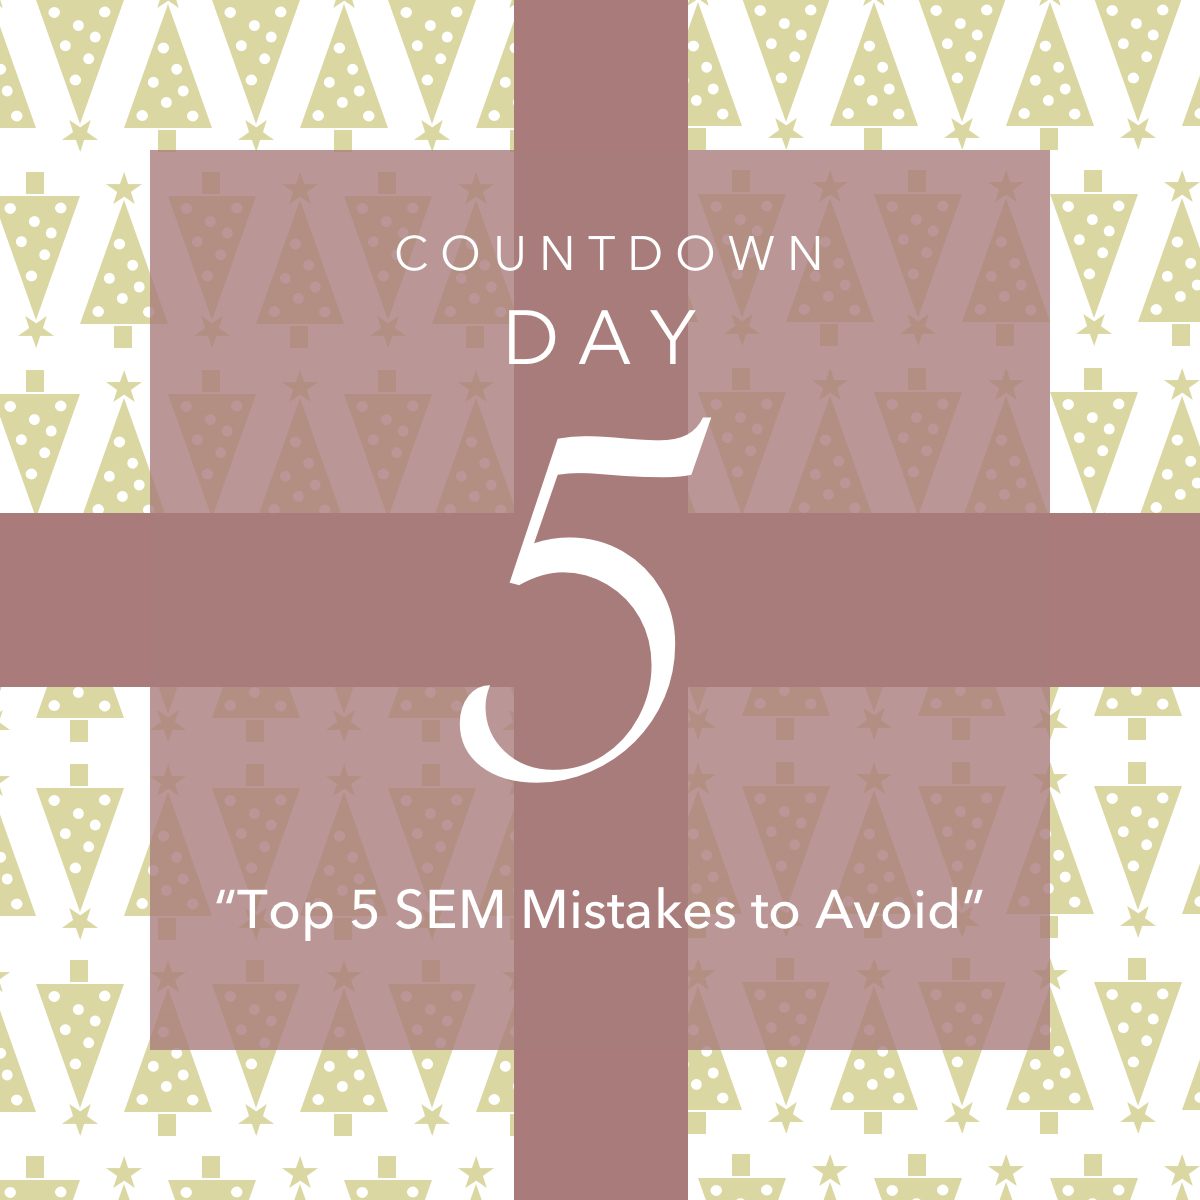 Day 5 Top 5 SEM mistakes to Avoid 